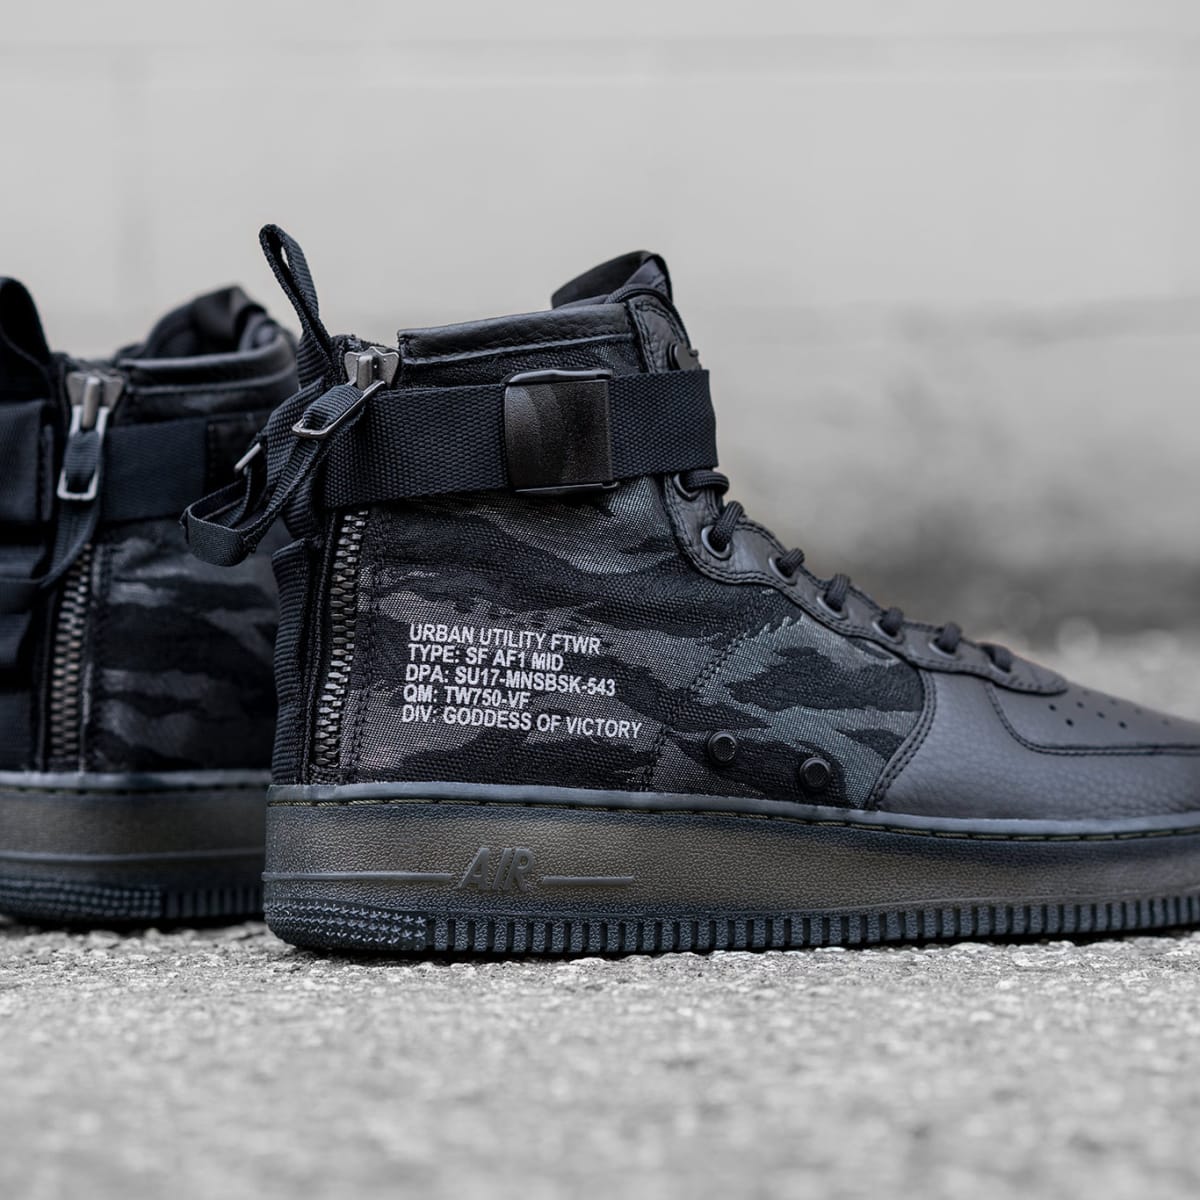 Nike S Tactical Inspired Special Field Air Force 1 Gets A New Mid Version Acquire